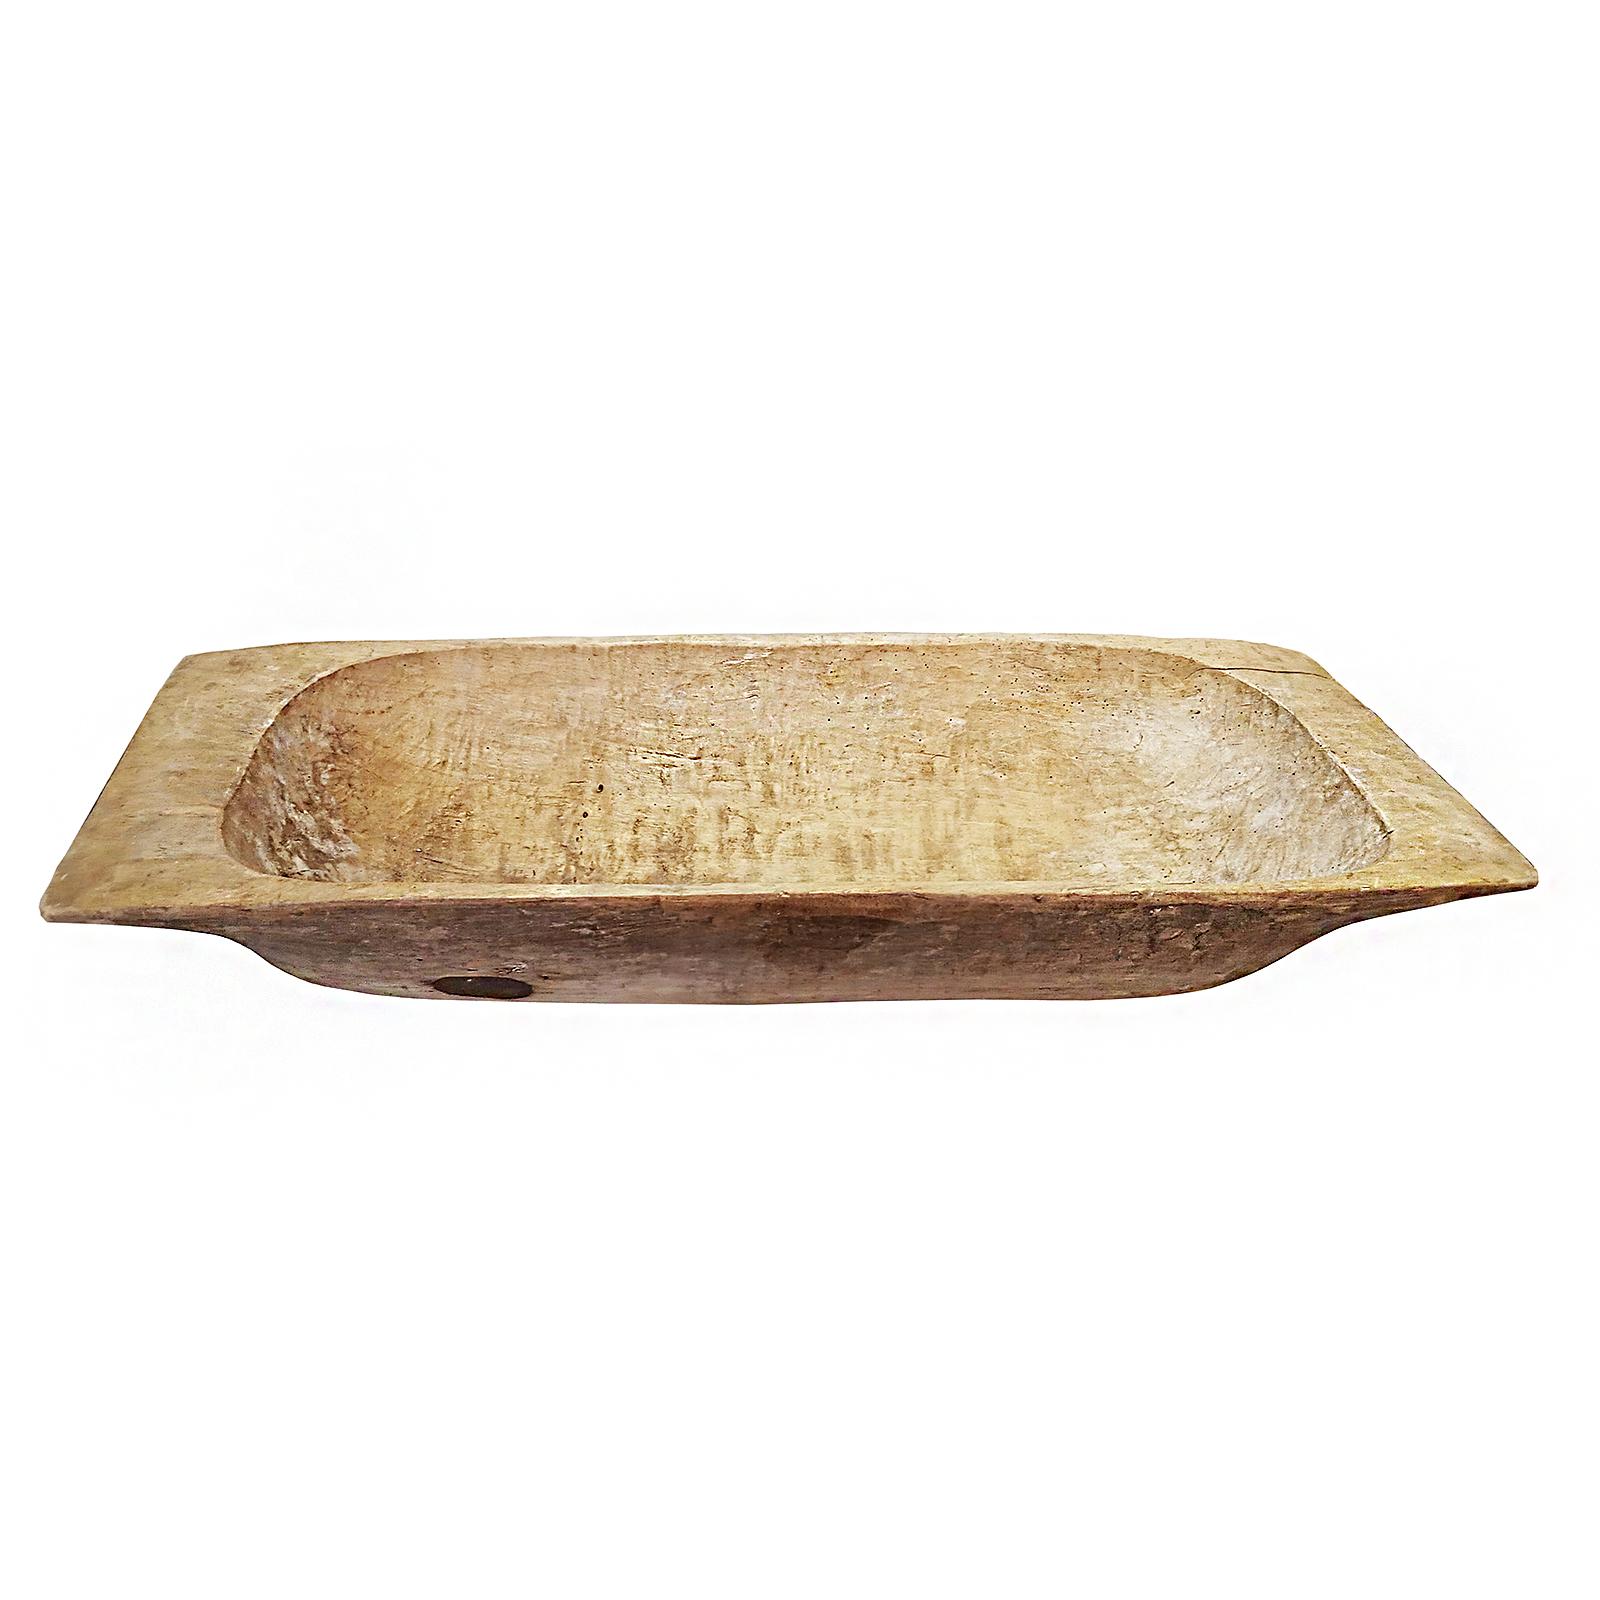 A vintage Tanzanian wooden trough, circa 1940. 
Hand-carved out of blonde wood. Contains a metal patch. 

Can be used as an indoor decorative object, as a cachepot for a mini-garden, or as an outdoor patio element. 